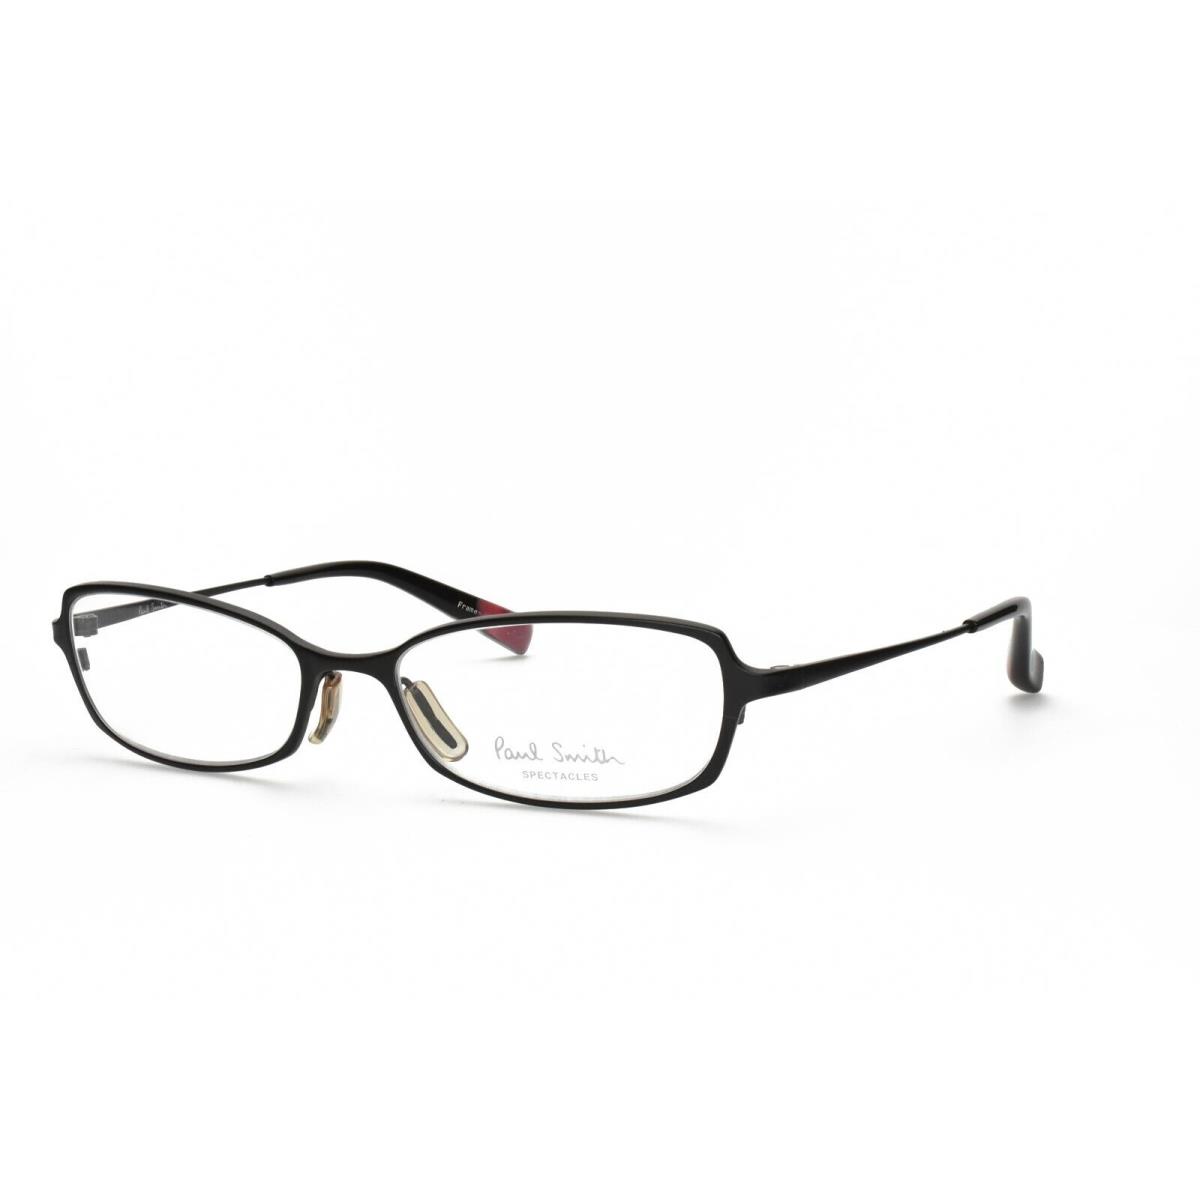 Paul Smith PS 188 Mox Eyeglasses Frames Only 51-16-130